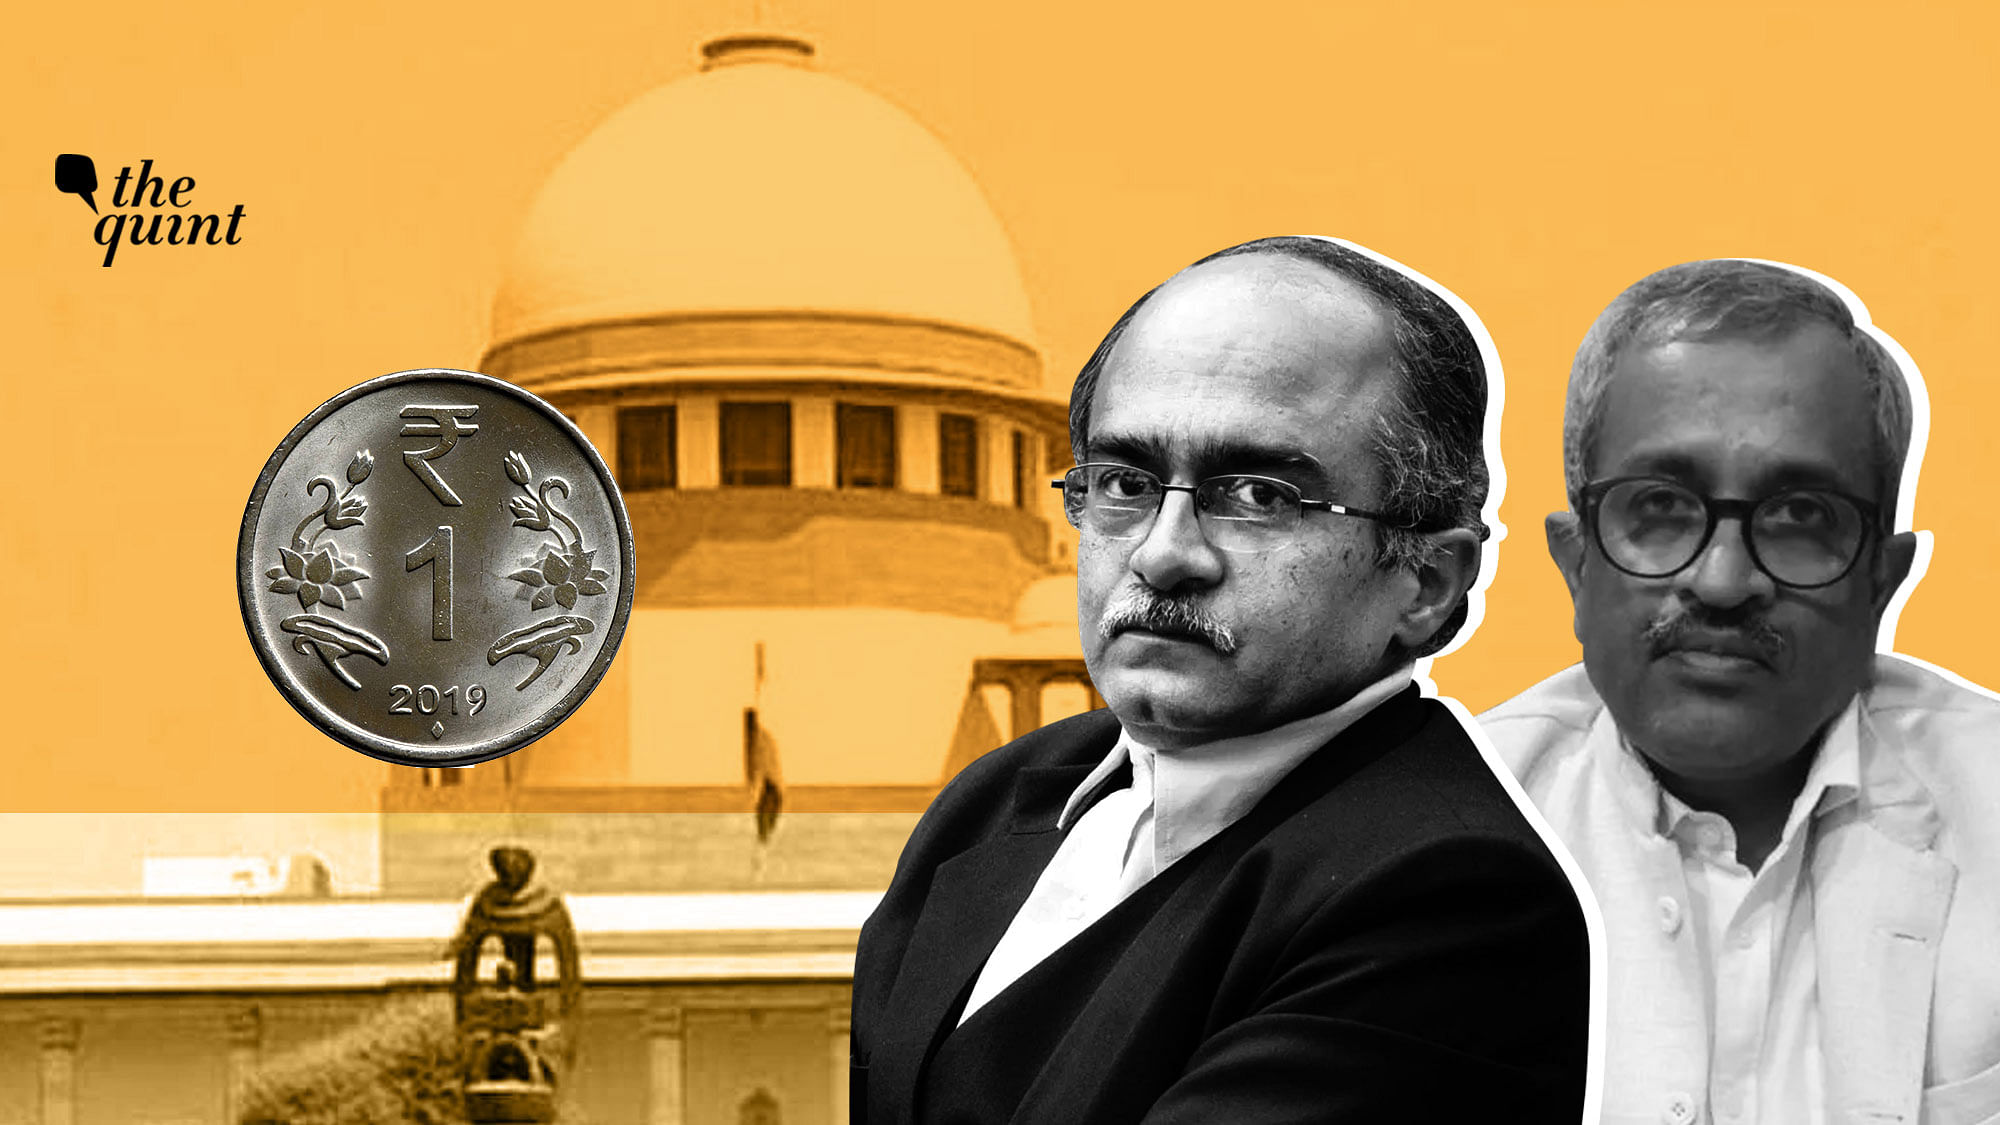 Senior advocate Sanjay Hegde (R) talks about the Re 1 fine imposed by the Supreme Court on Prashant Bhushan for contempt.